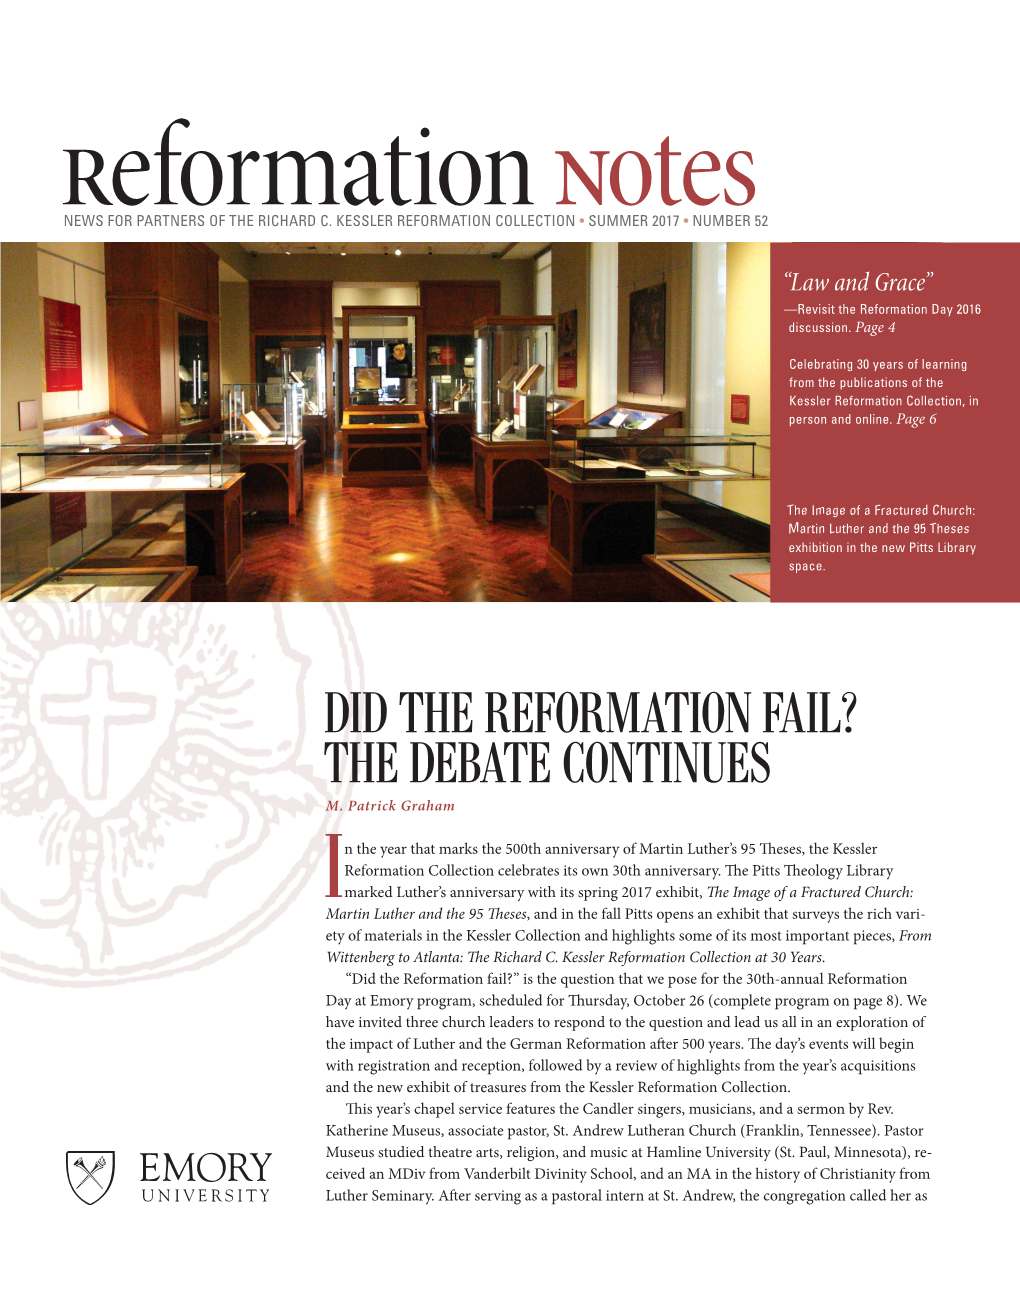 Reformation Notes Summer 2017 • 3 6 2016 Reformation Day at Emory Th 1 the 29Th Reformation Day at Emory Program Took As Its Theme, “Law and Anthony Briggman 5 8